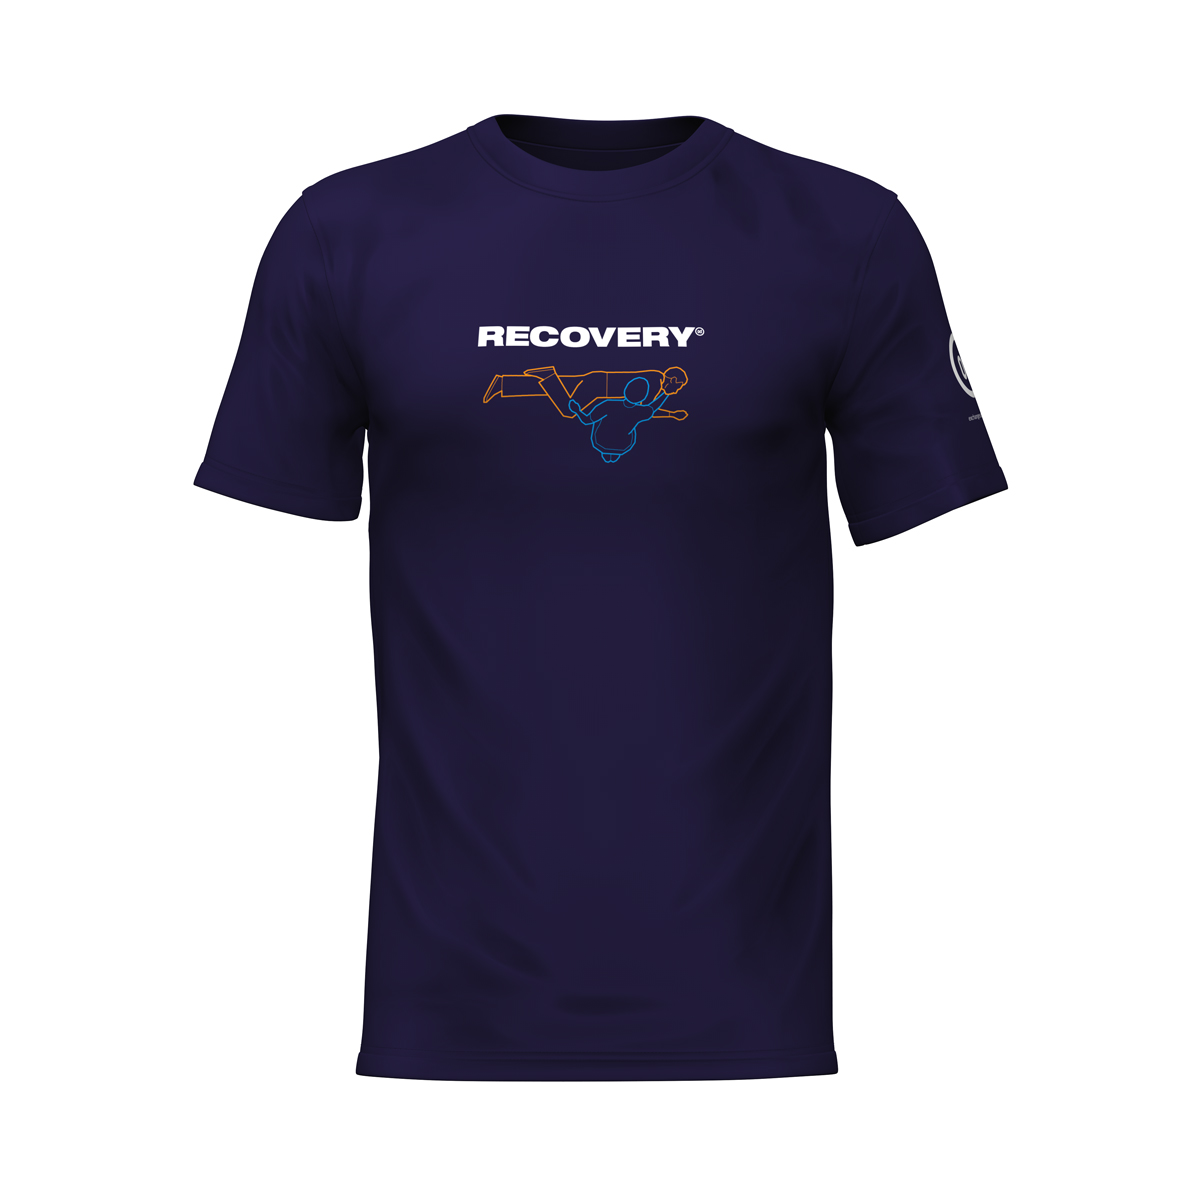 Recovery T-shirt (large)